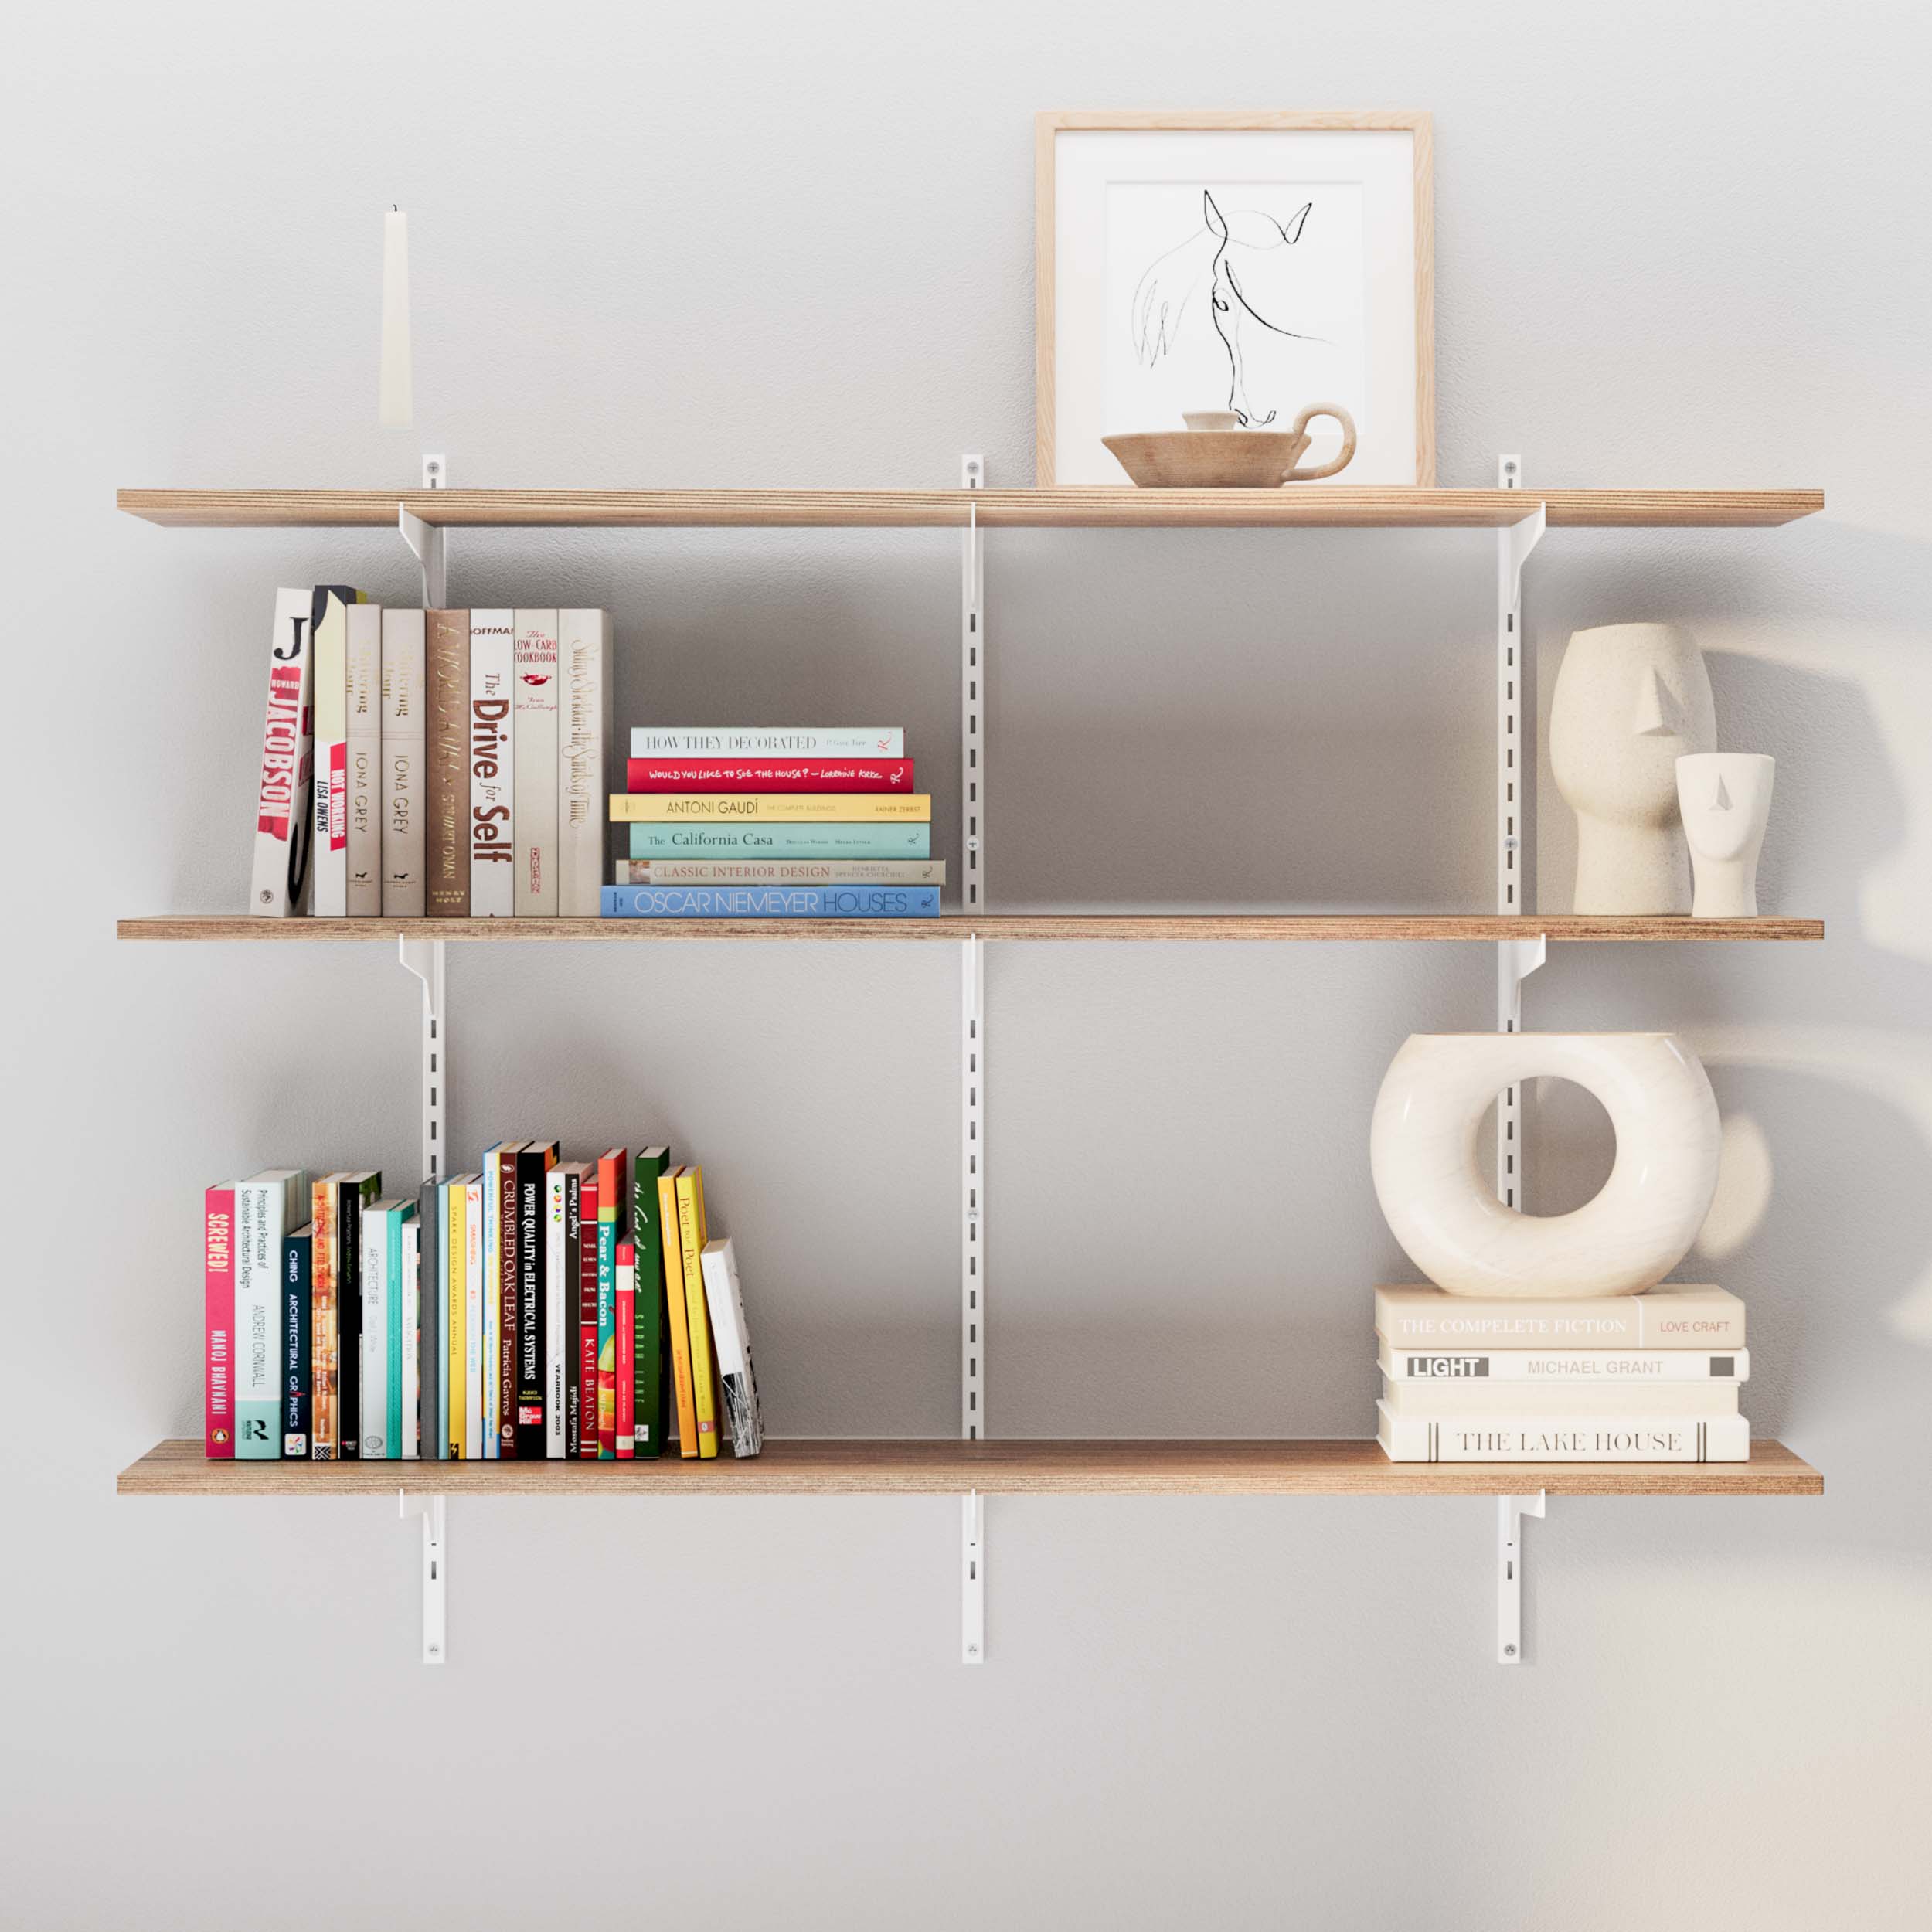 Wooden shelves arranged with an eclectic mix of books, framed art, and modern pottery.